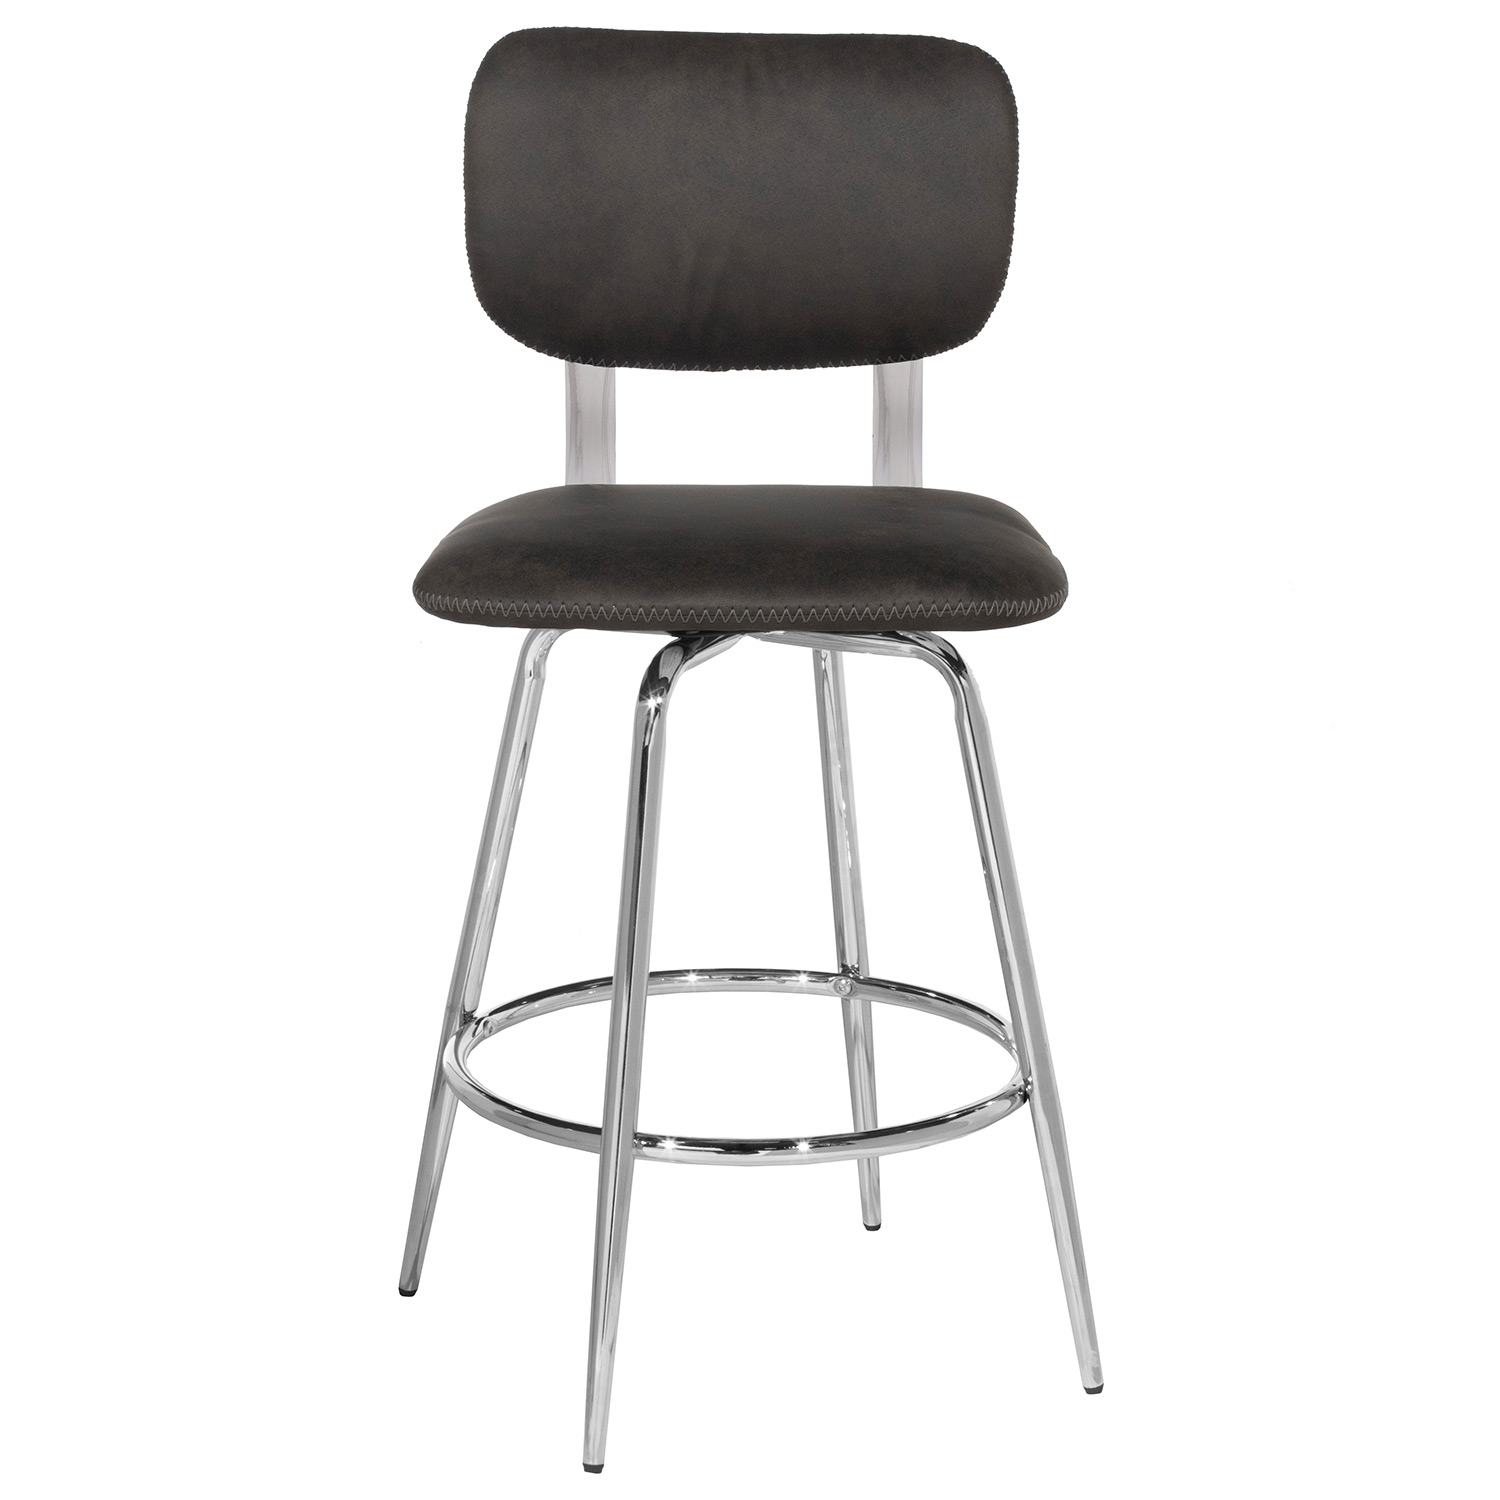 Hillsdale Bloomfield Retro Metal Swivel Counter Height Stool - Chrome- Set of 2